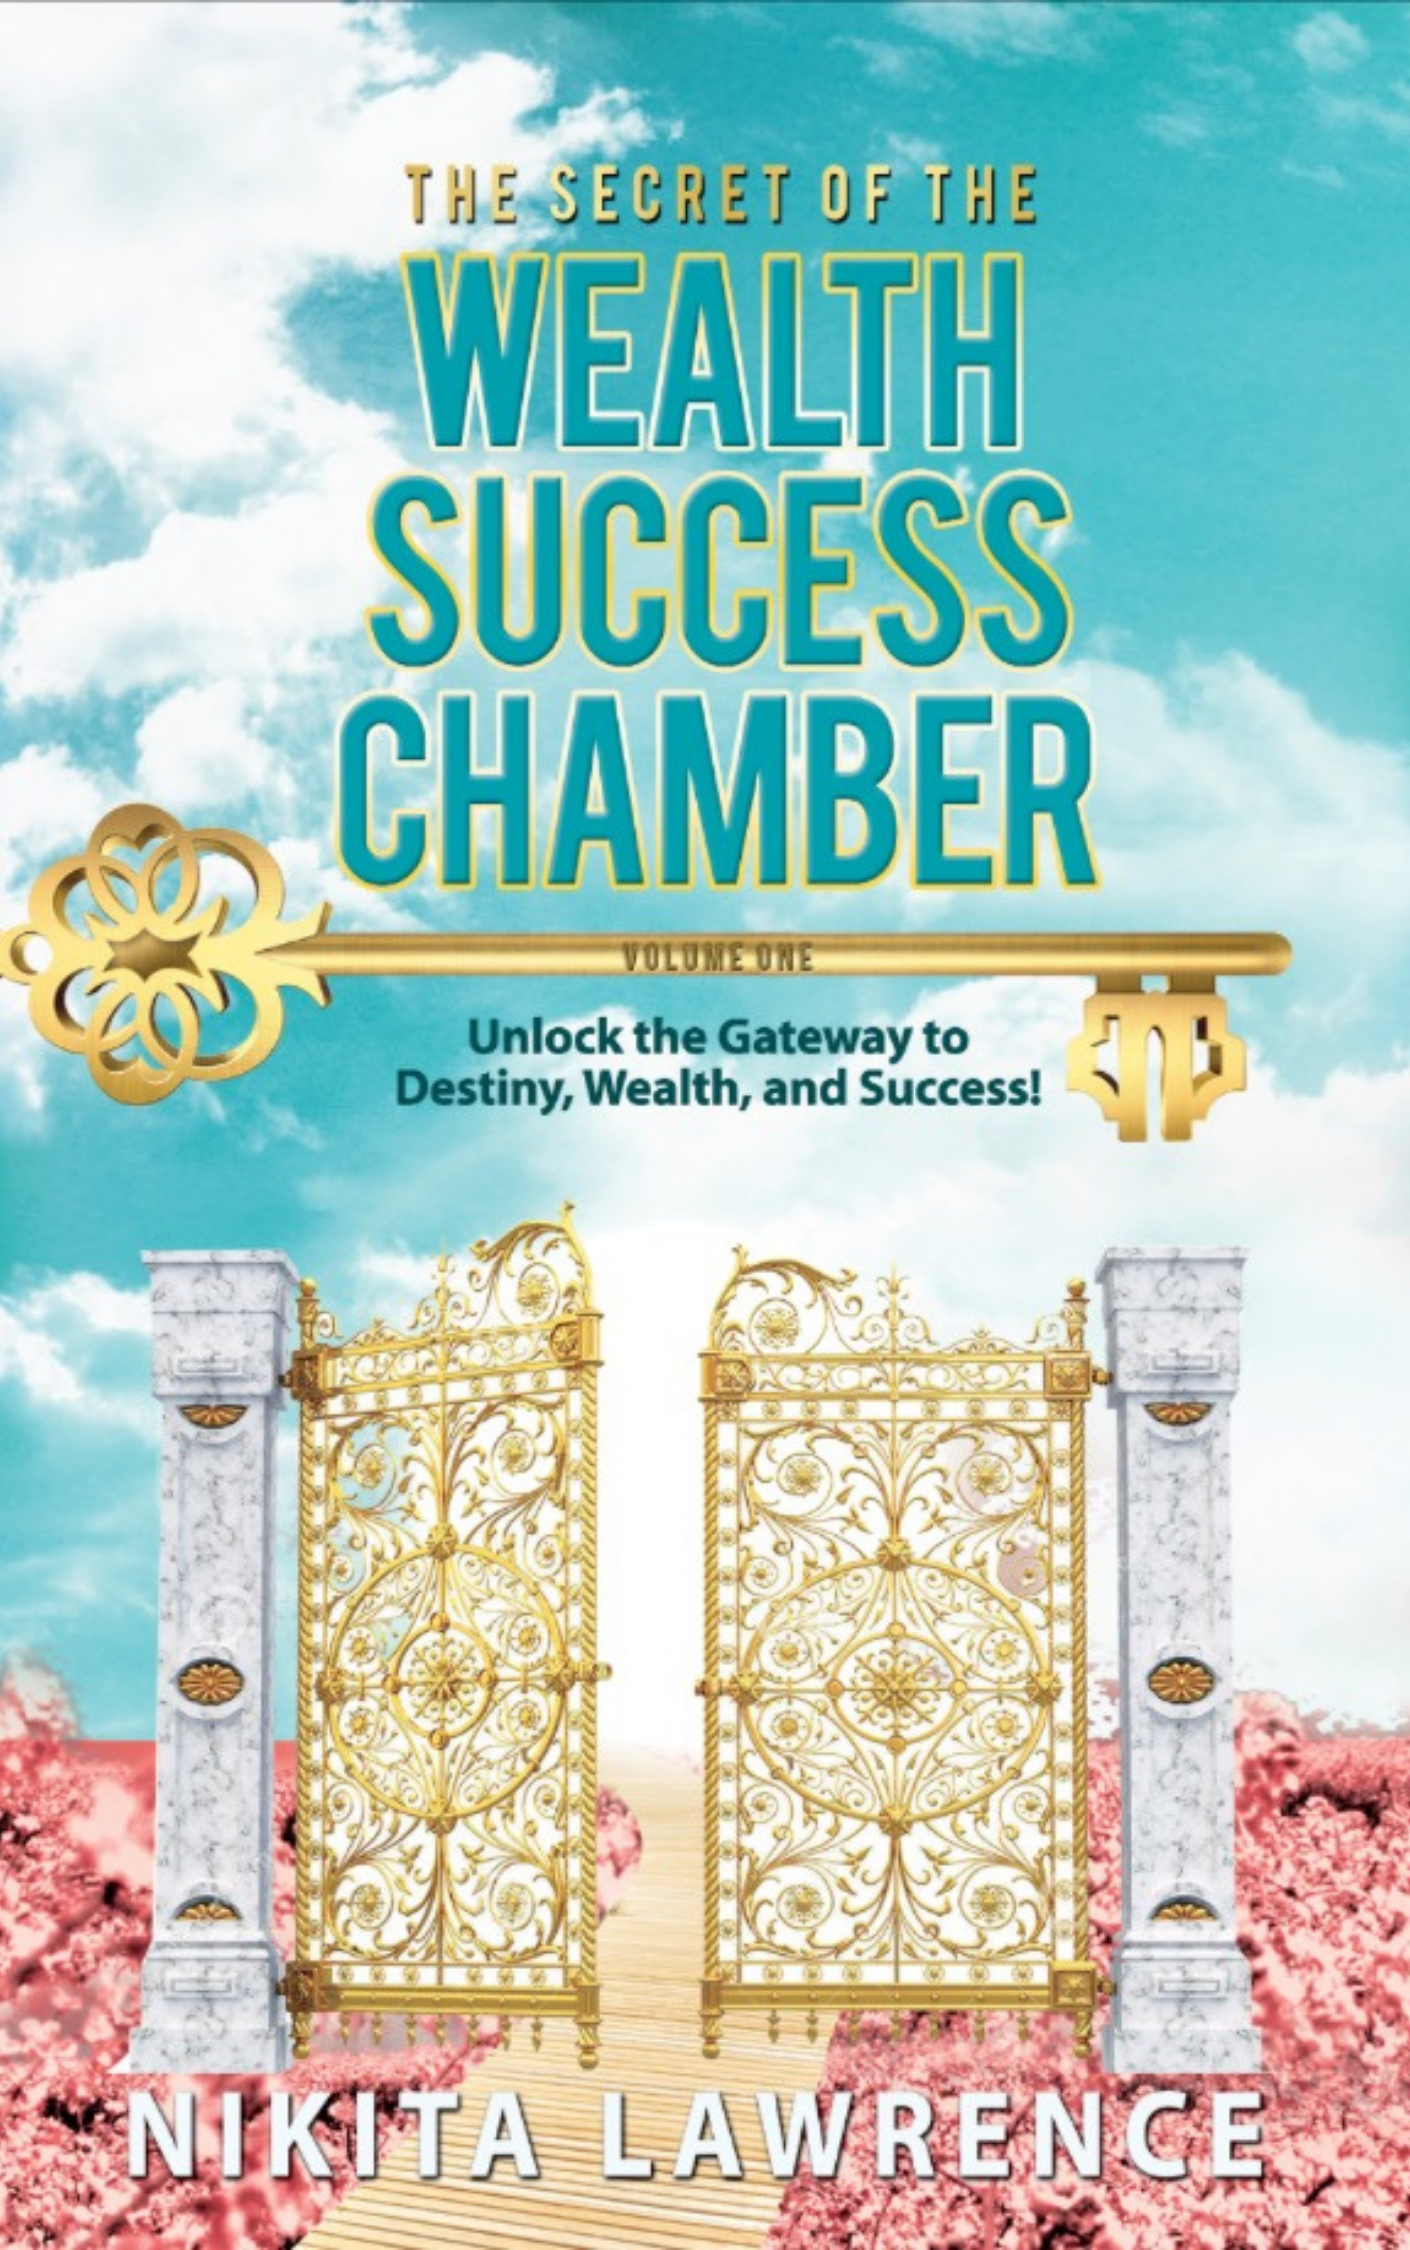 Bulk Order 500 Copies of Bestseller, The Secret of the Wealth Success Chamber